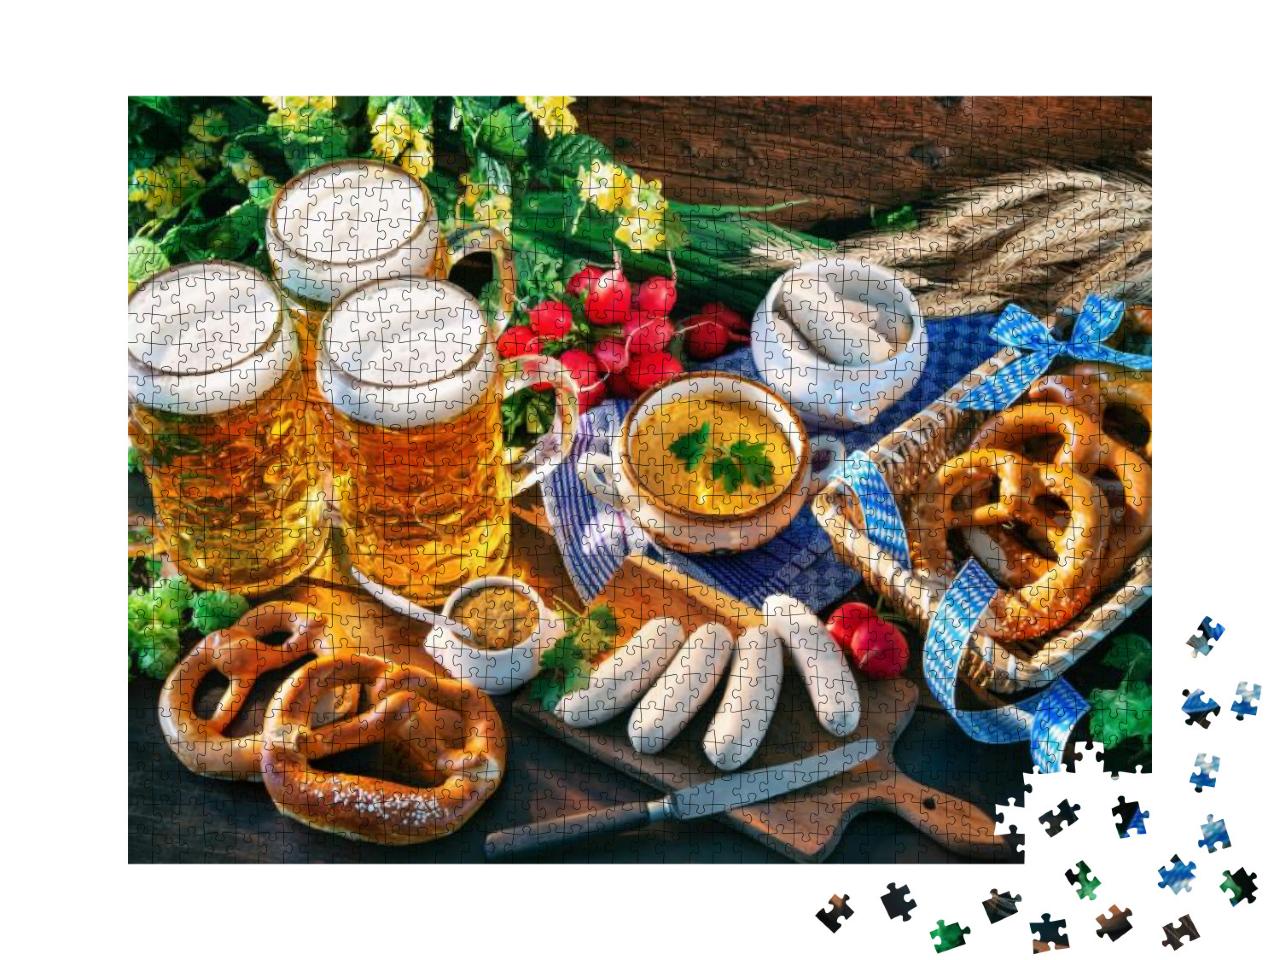 Bavarian Sausages with Pretzels, Sweet Mustard & Beer Mug... Jigsaw Puzzle with 1000 pieces